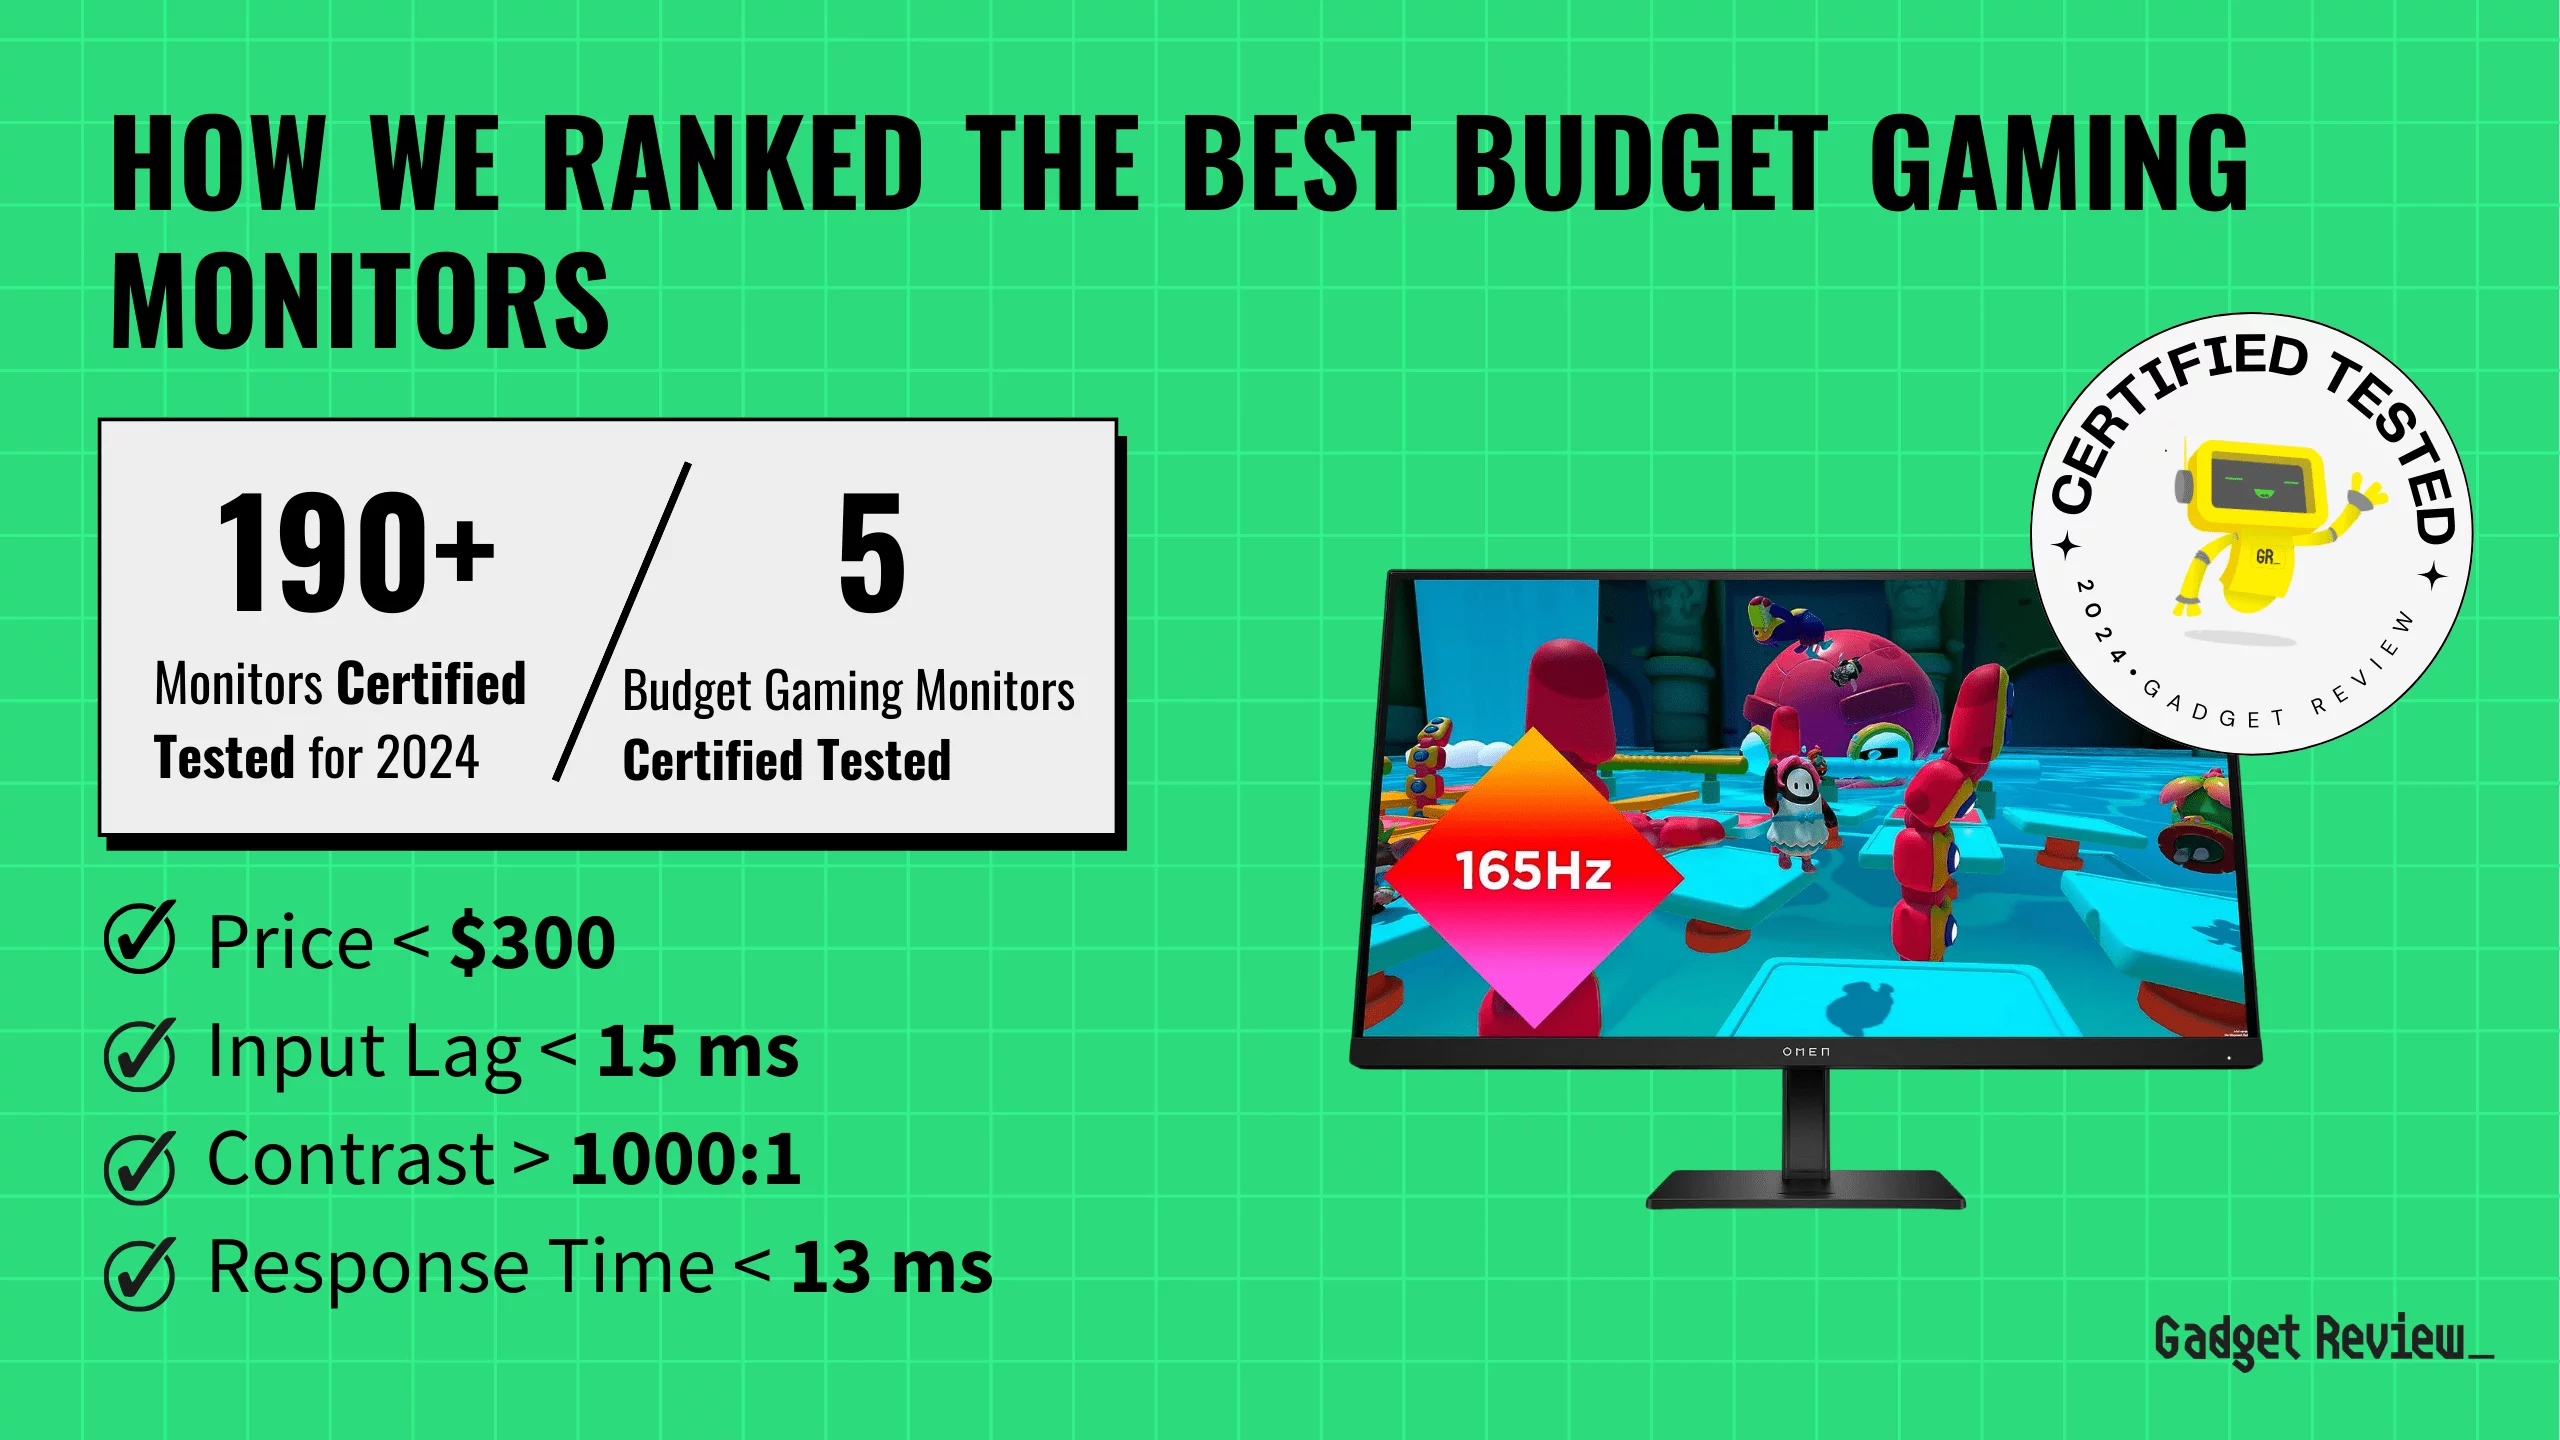 best budget gaming monitor guide that shows the top best gaming monitor model